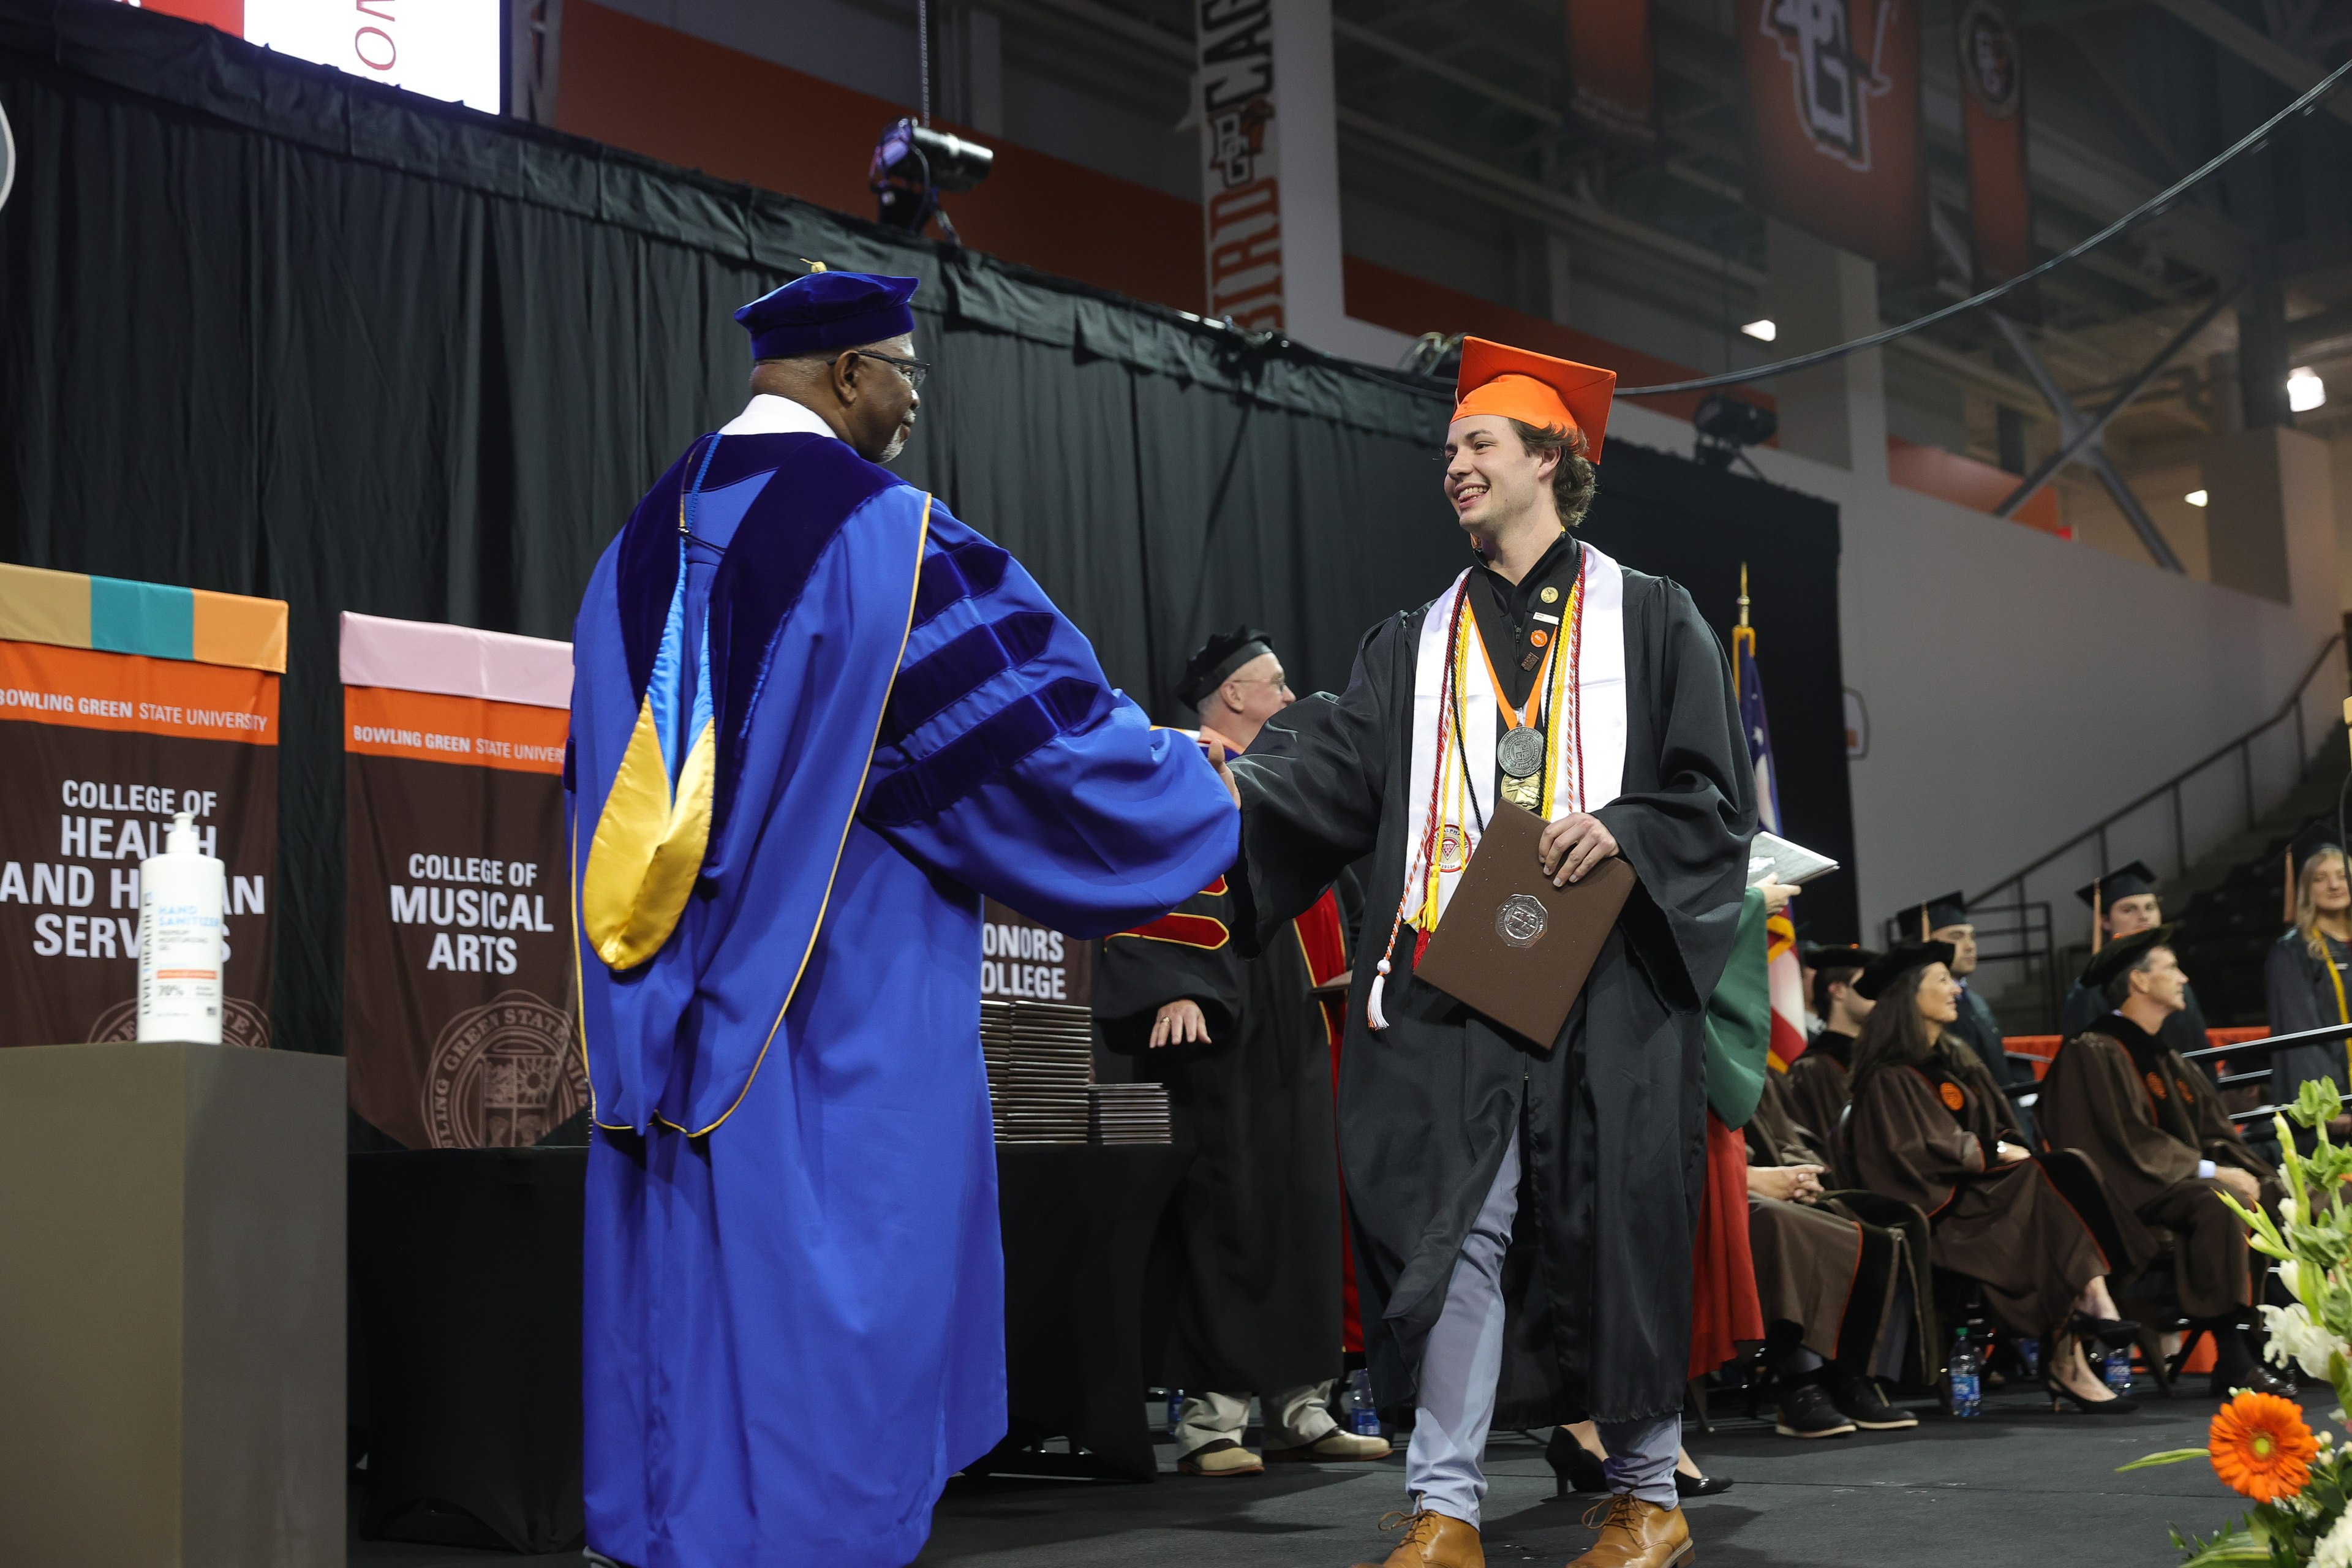 Graduate shakes hands with BGSU Provost and Senior Vice President of Academic and Student Affairs Dr. Joe B. Whitehead Jr.